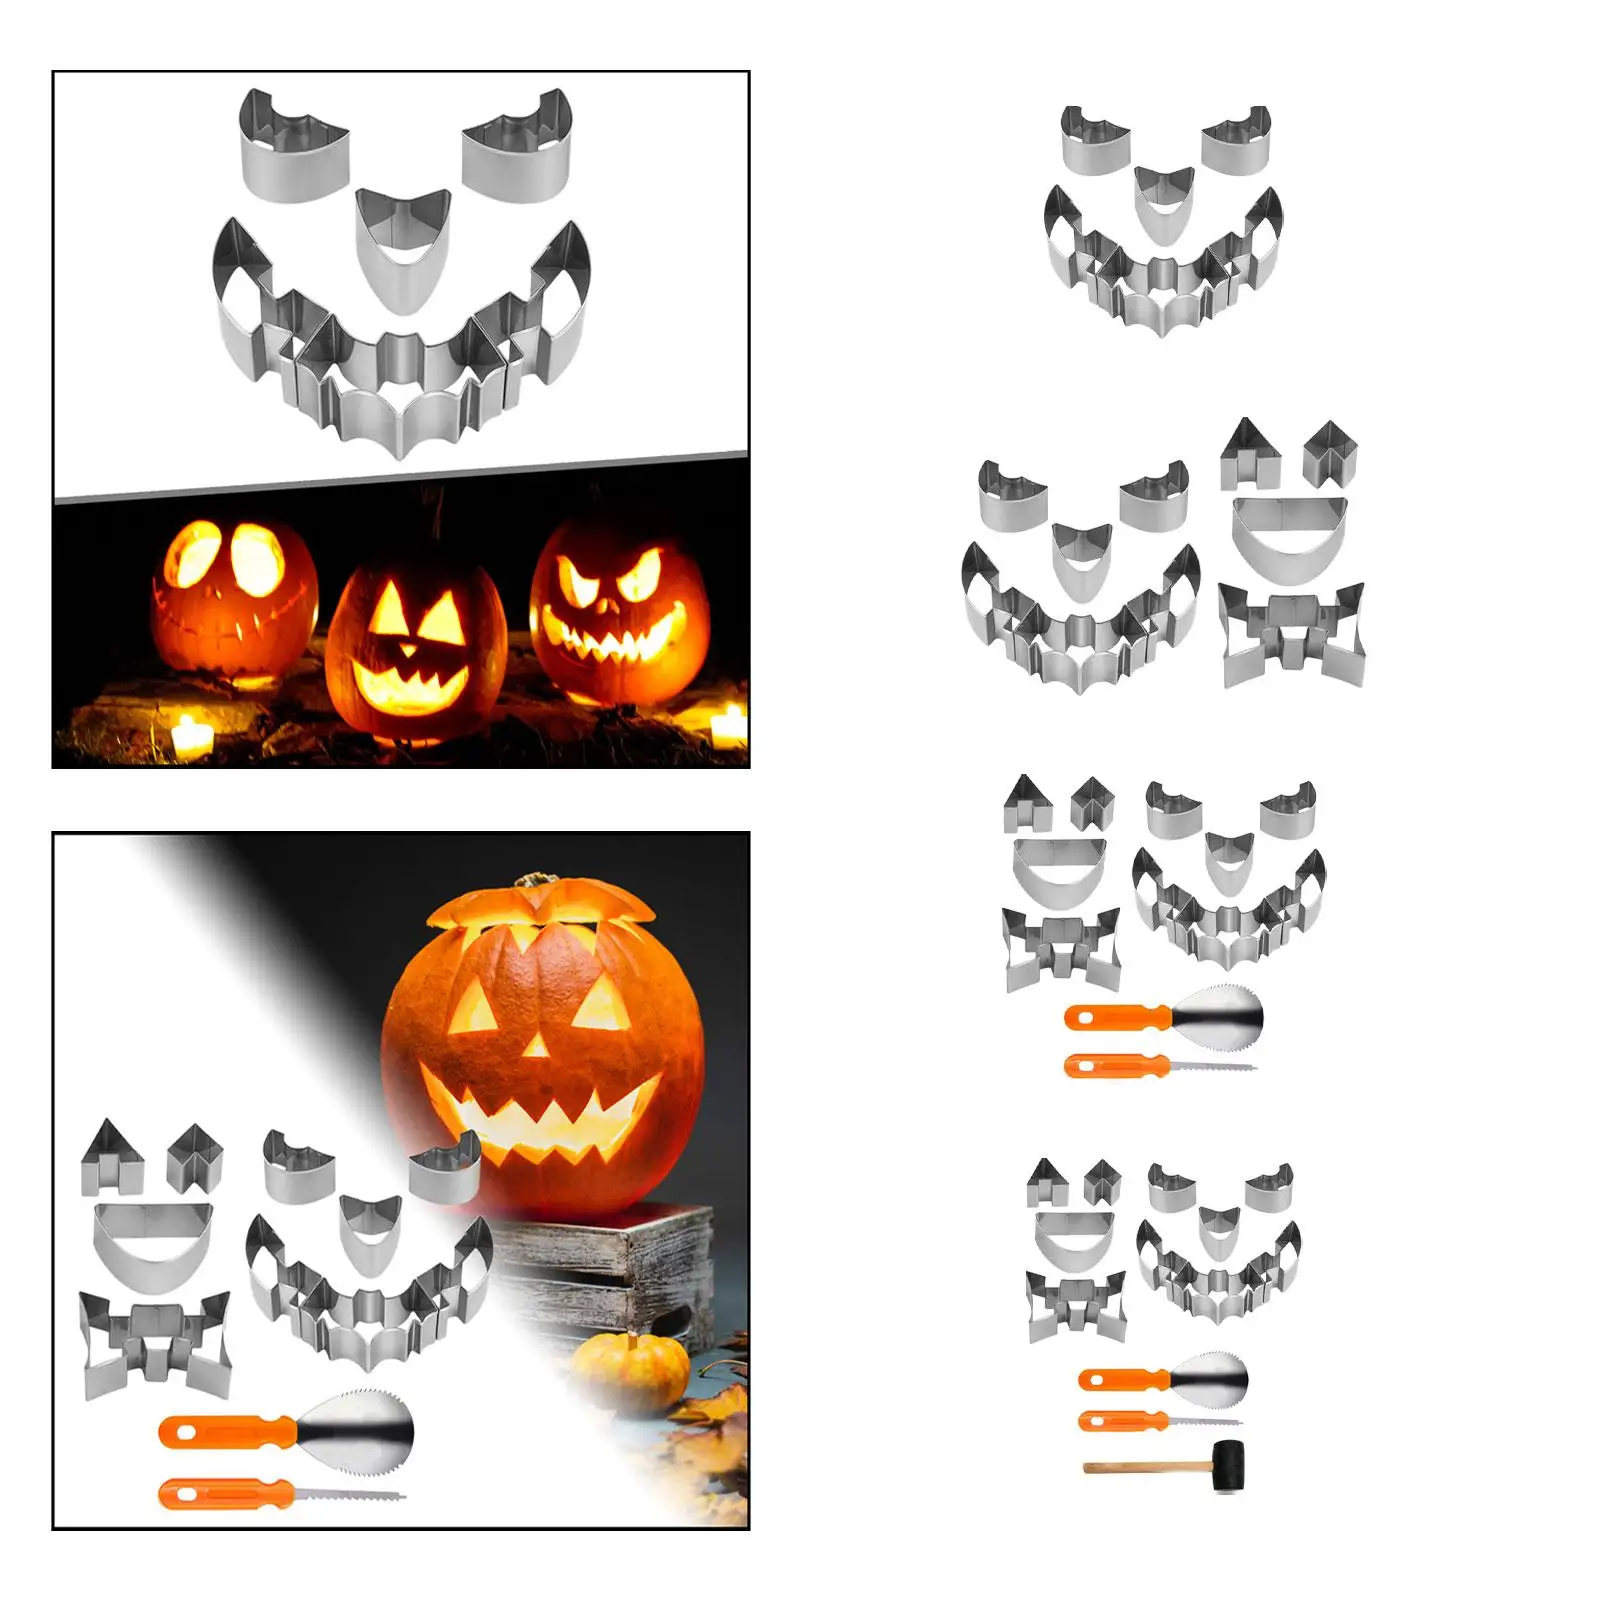 Halloween Pumpkin Carving Tools Precision Kitchen Gadgets Pumpkin Carving Stencils Pumpkin Carver for Halloween Party Decoration